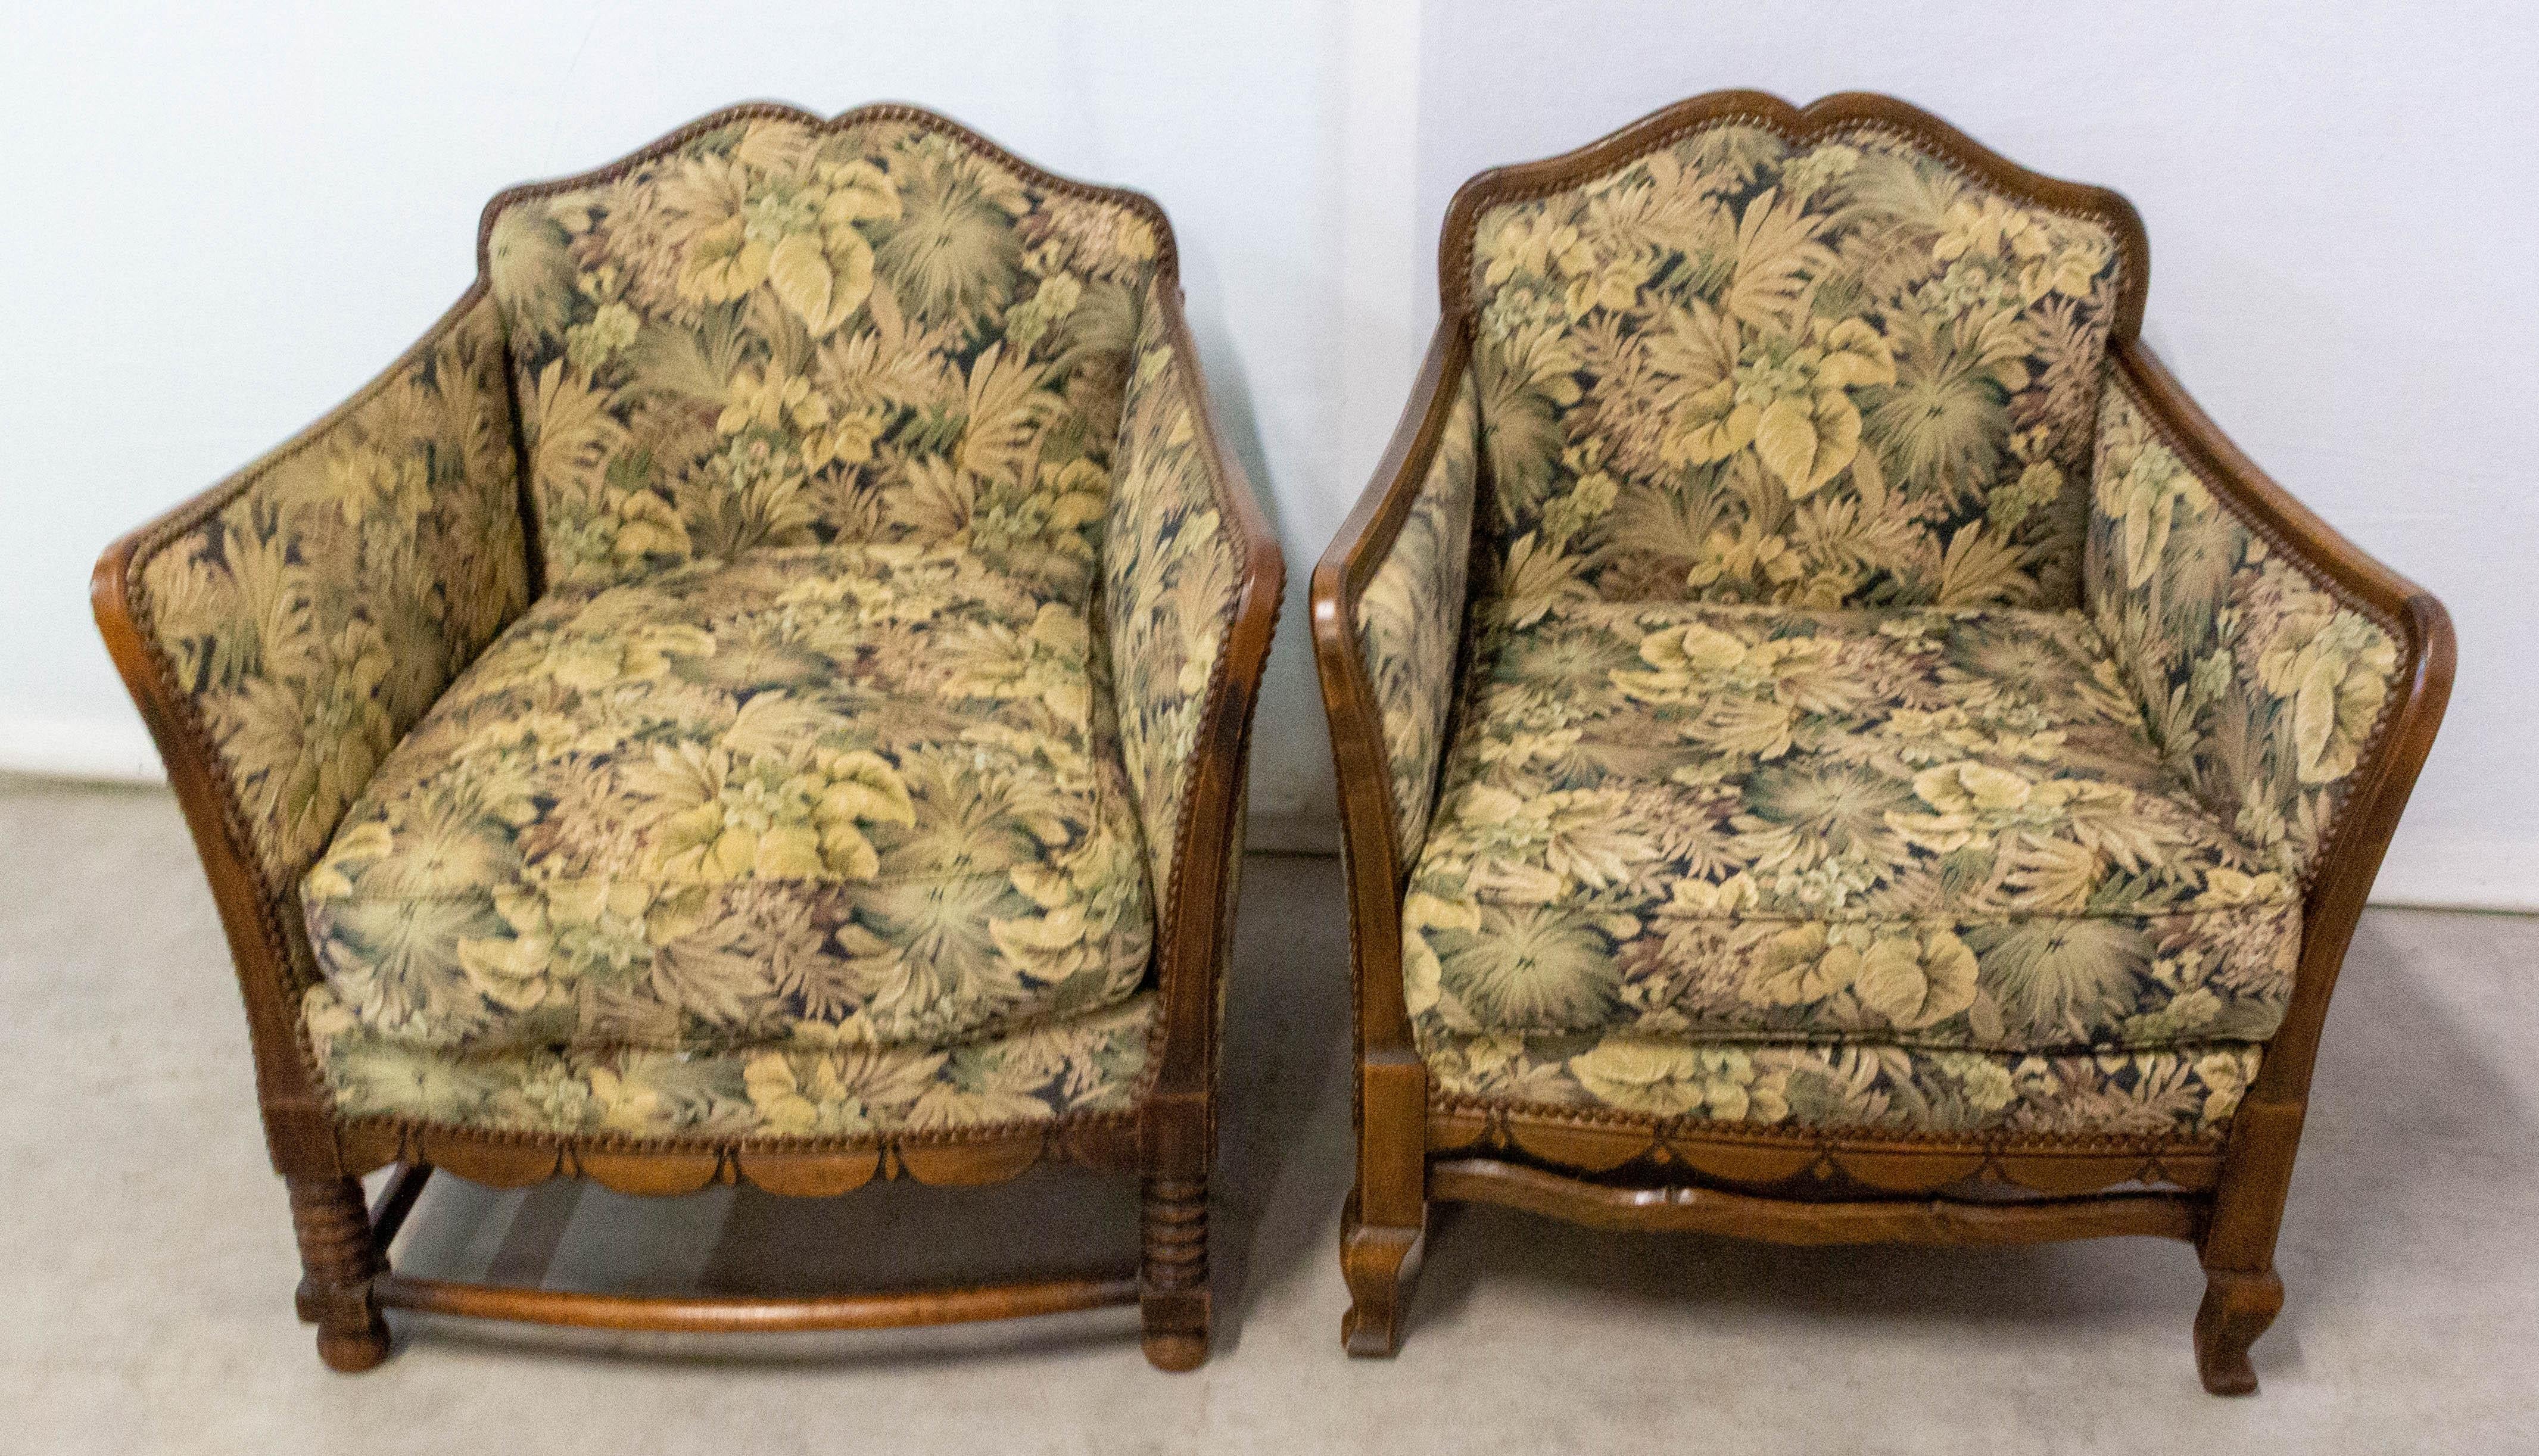 Pair of French armchairs side or desk beech chairs, to be re-upholstered
circa 1920
The two armchairs are very similar but they are not the same models.
Very comfortable.
Good condition
The frames are sound and solid.

Shipping:
- 65/69/76